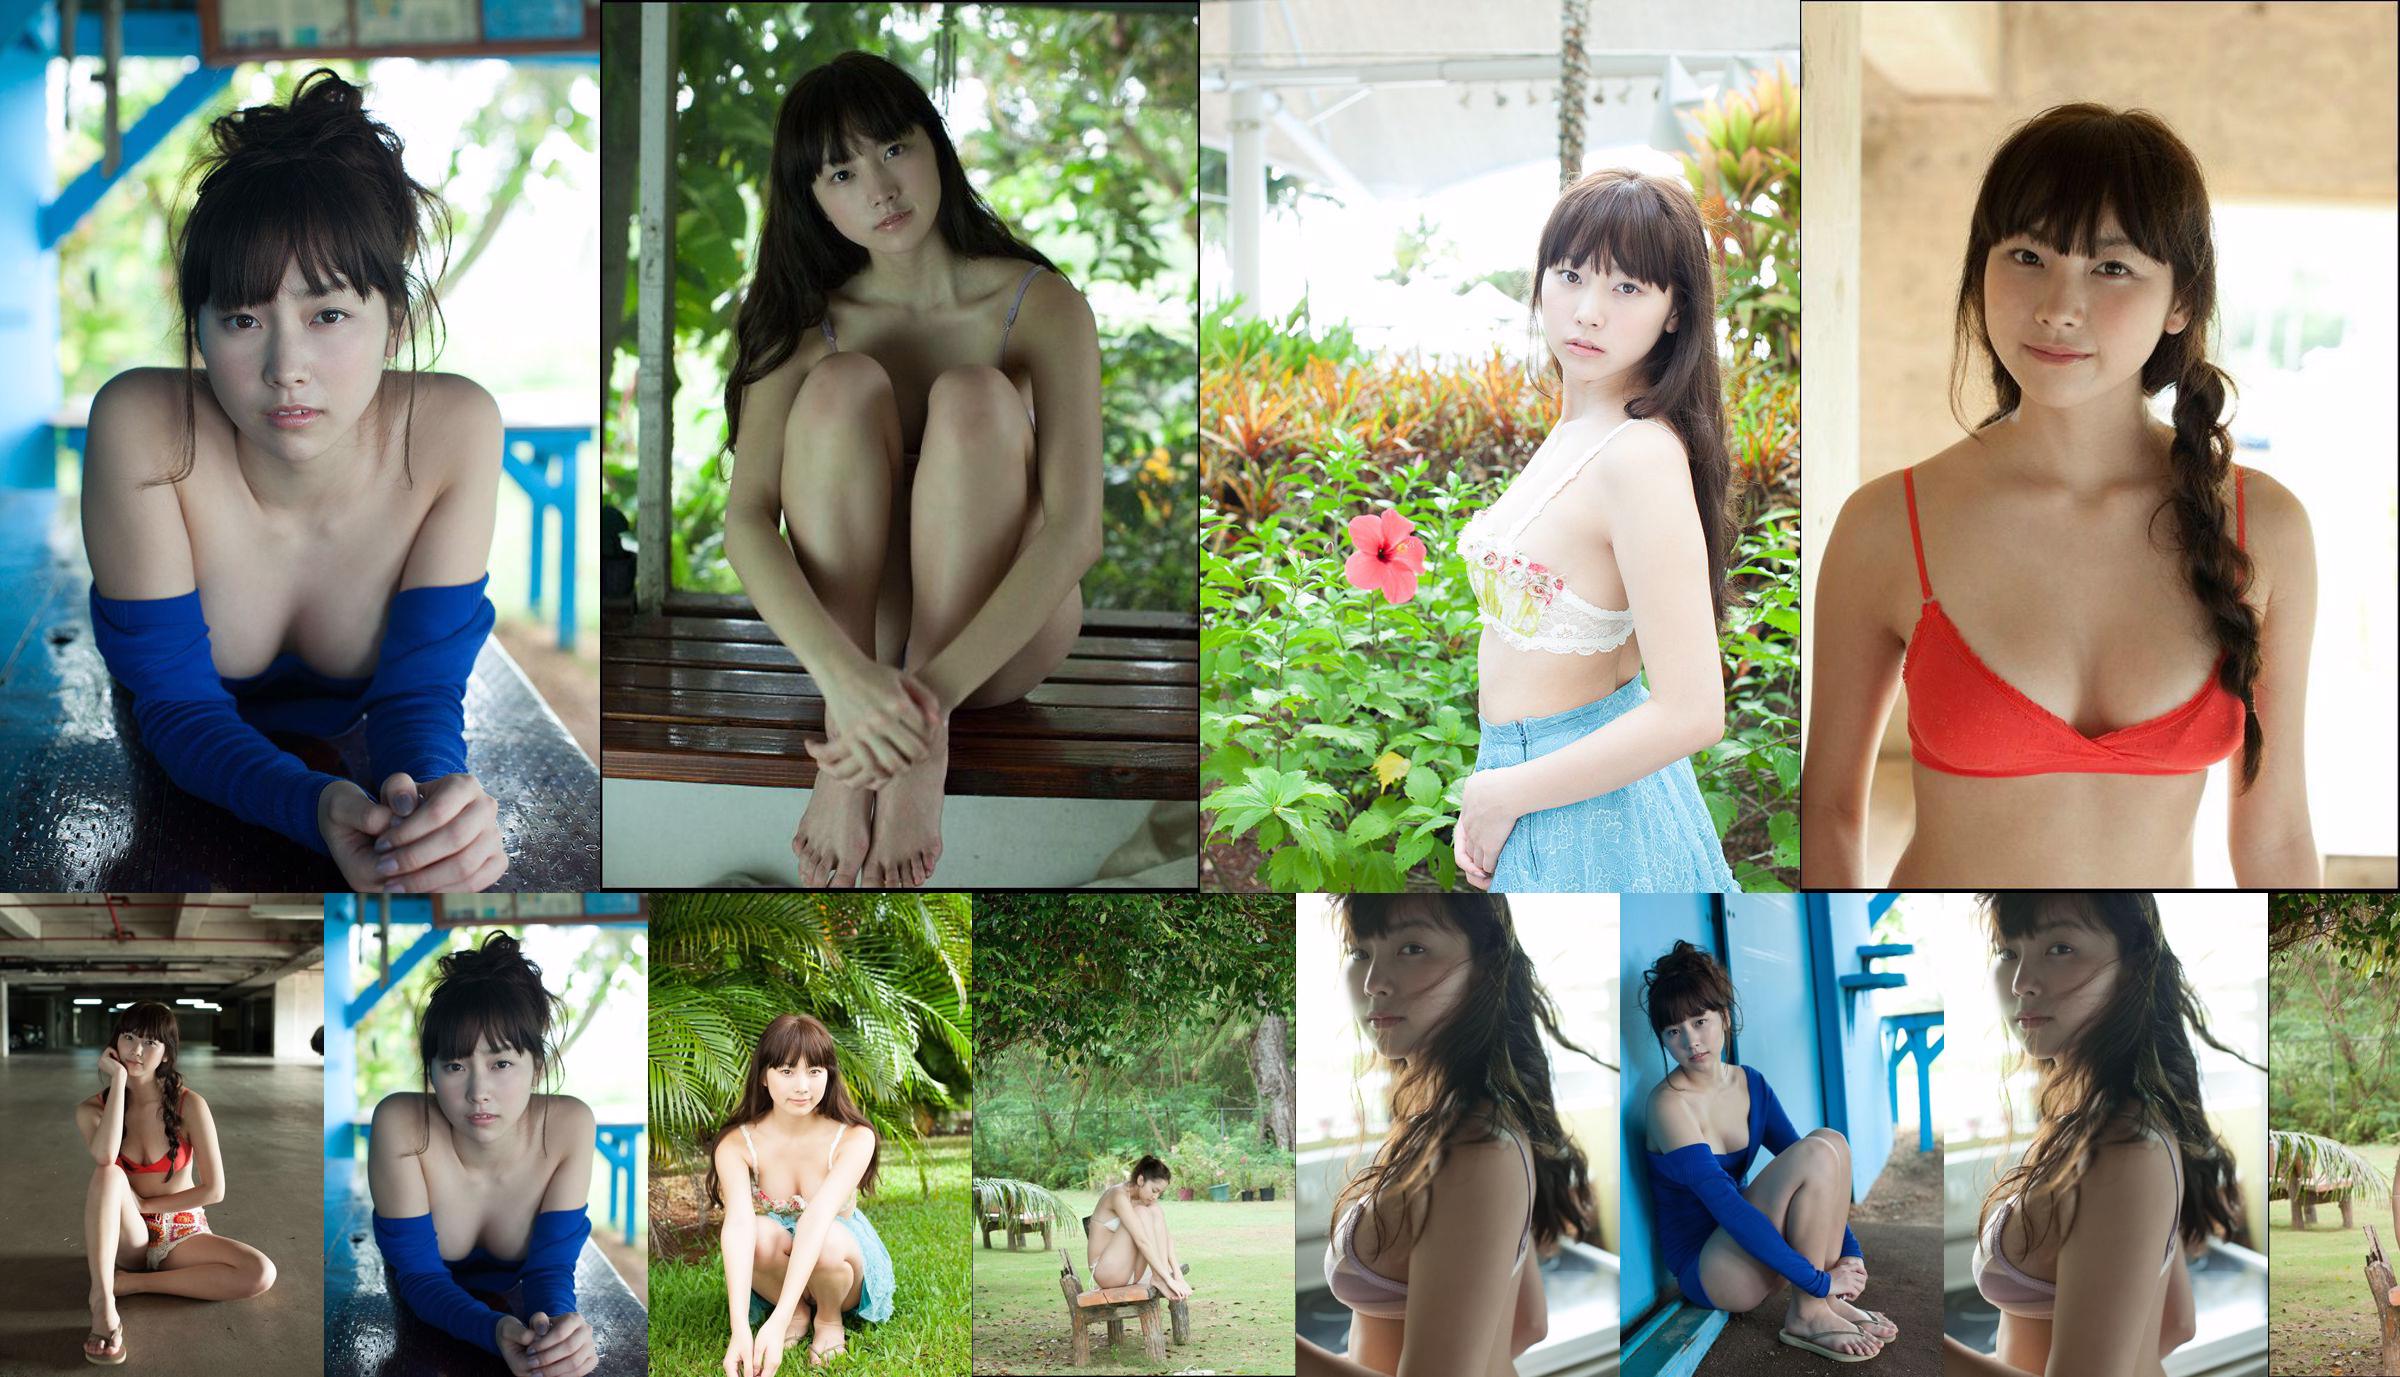 Chika Ojima "COMMENCER" [Image.tv] No.76a691 Page 1